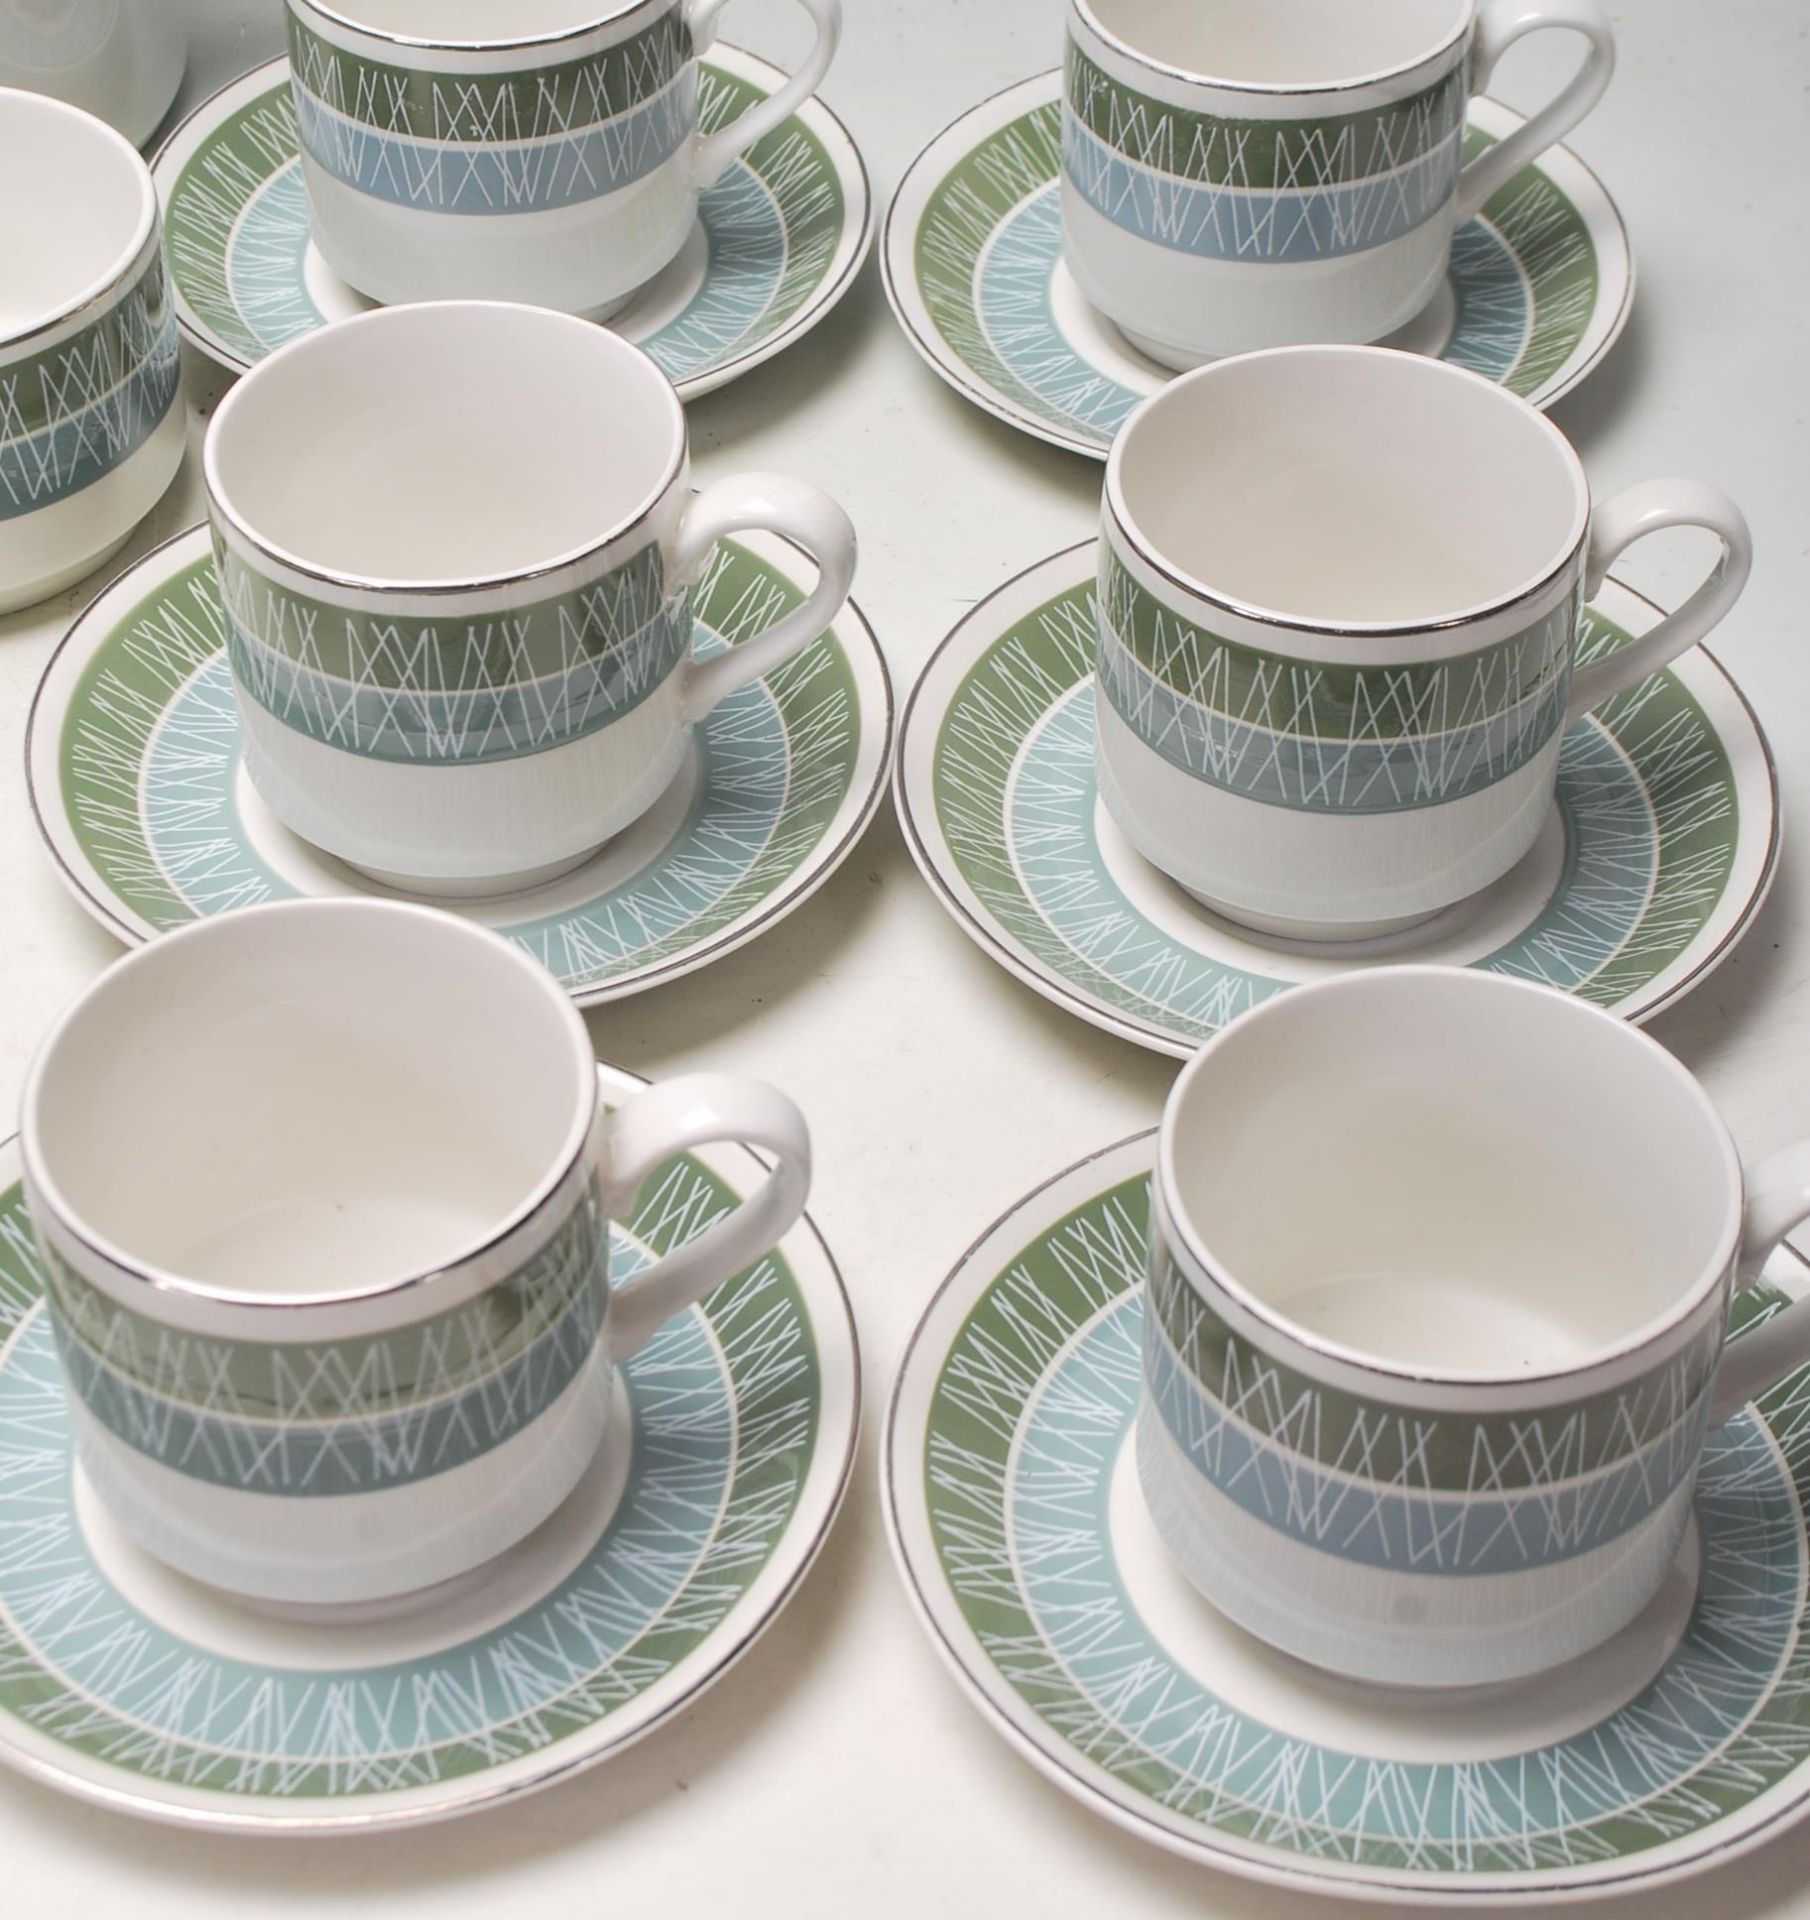 RETRO VINTAGE LATE 20TH CENTURY DINNER SERVICE BY MIDWINTER AND JG MEAKIN STUDIO. - Image 2 of 14